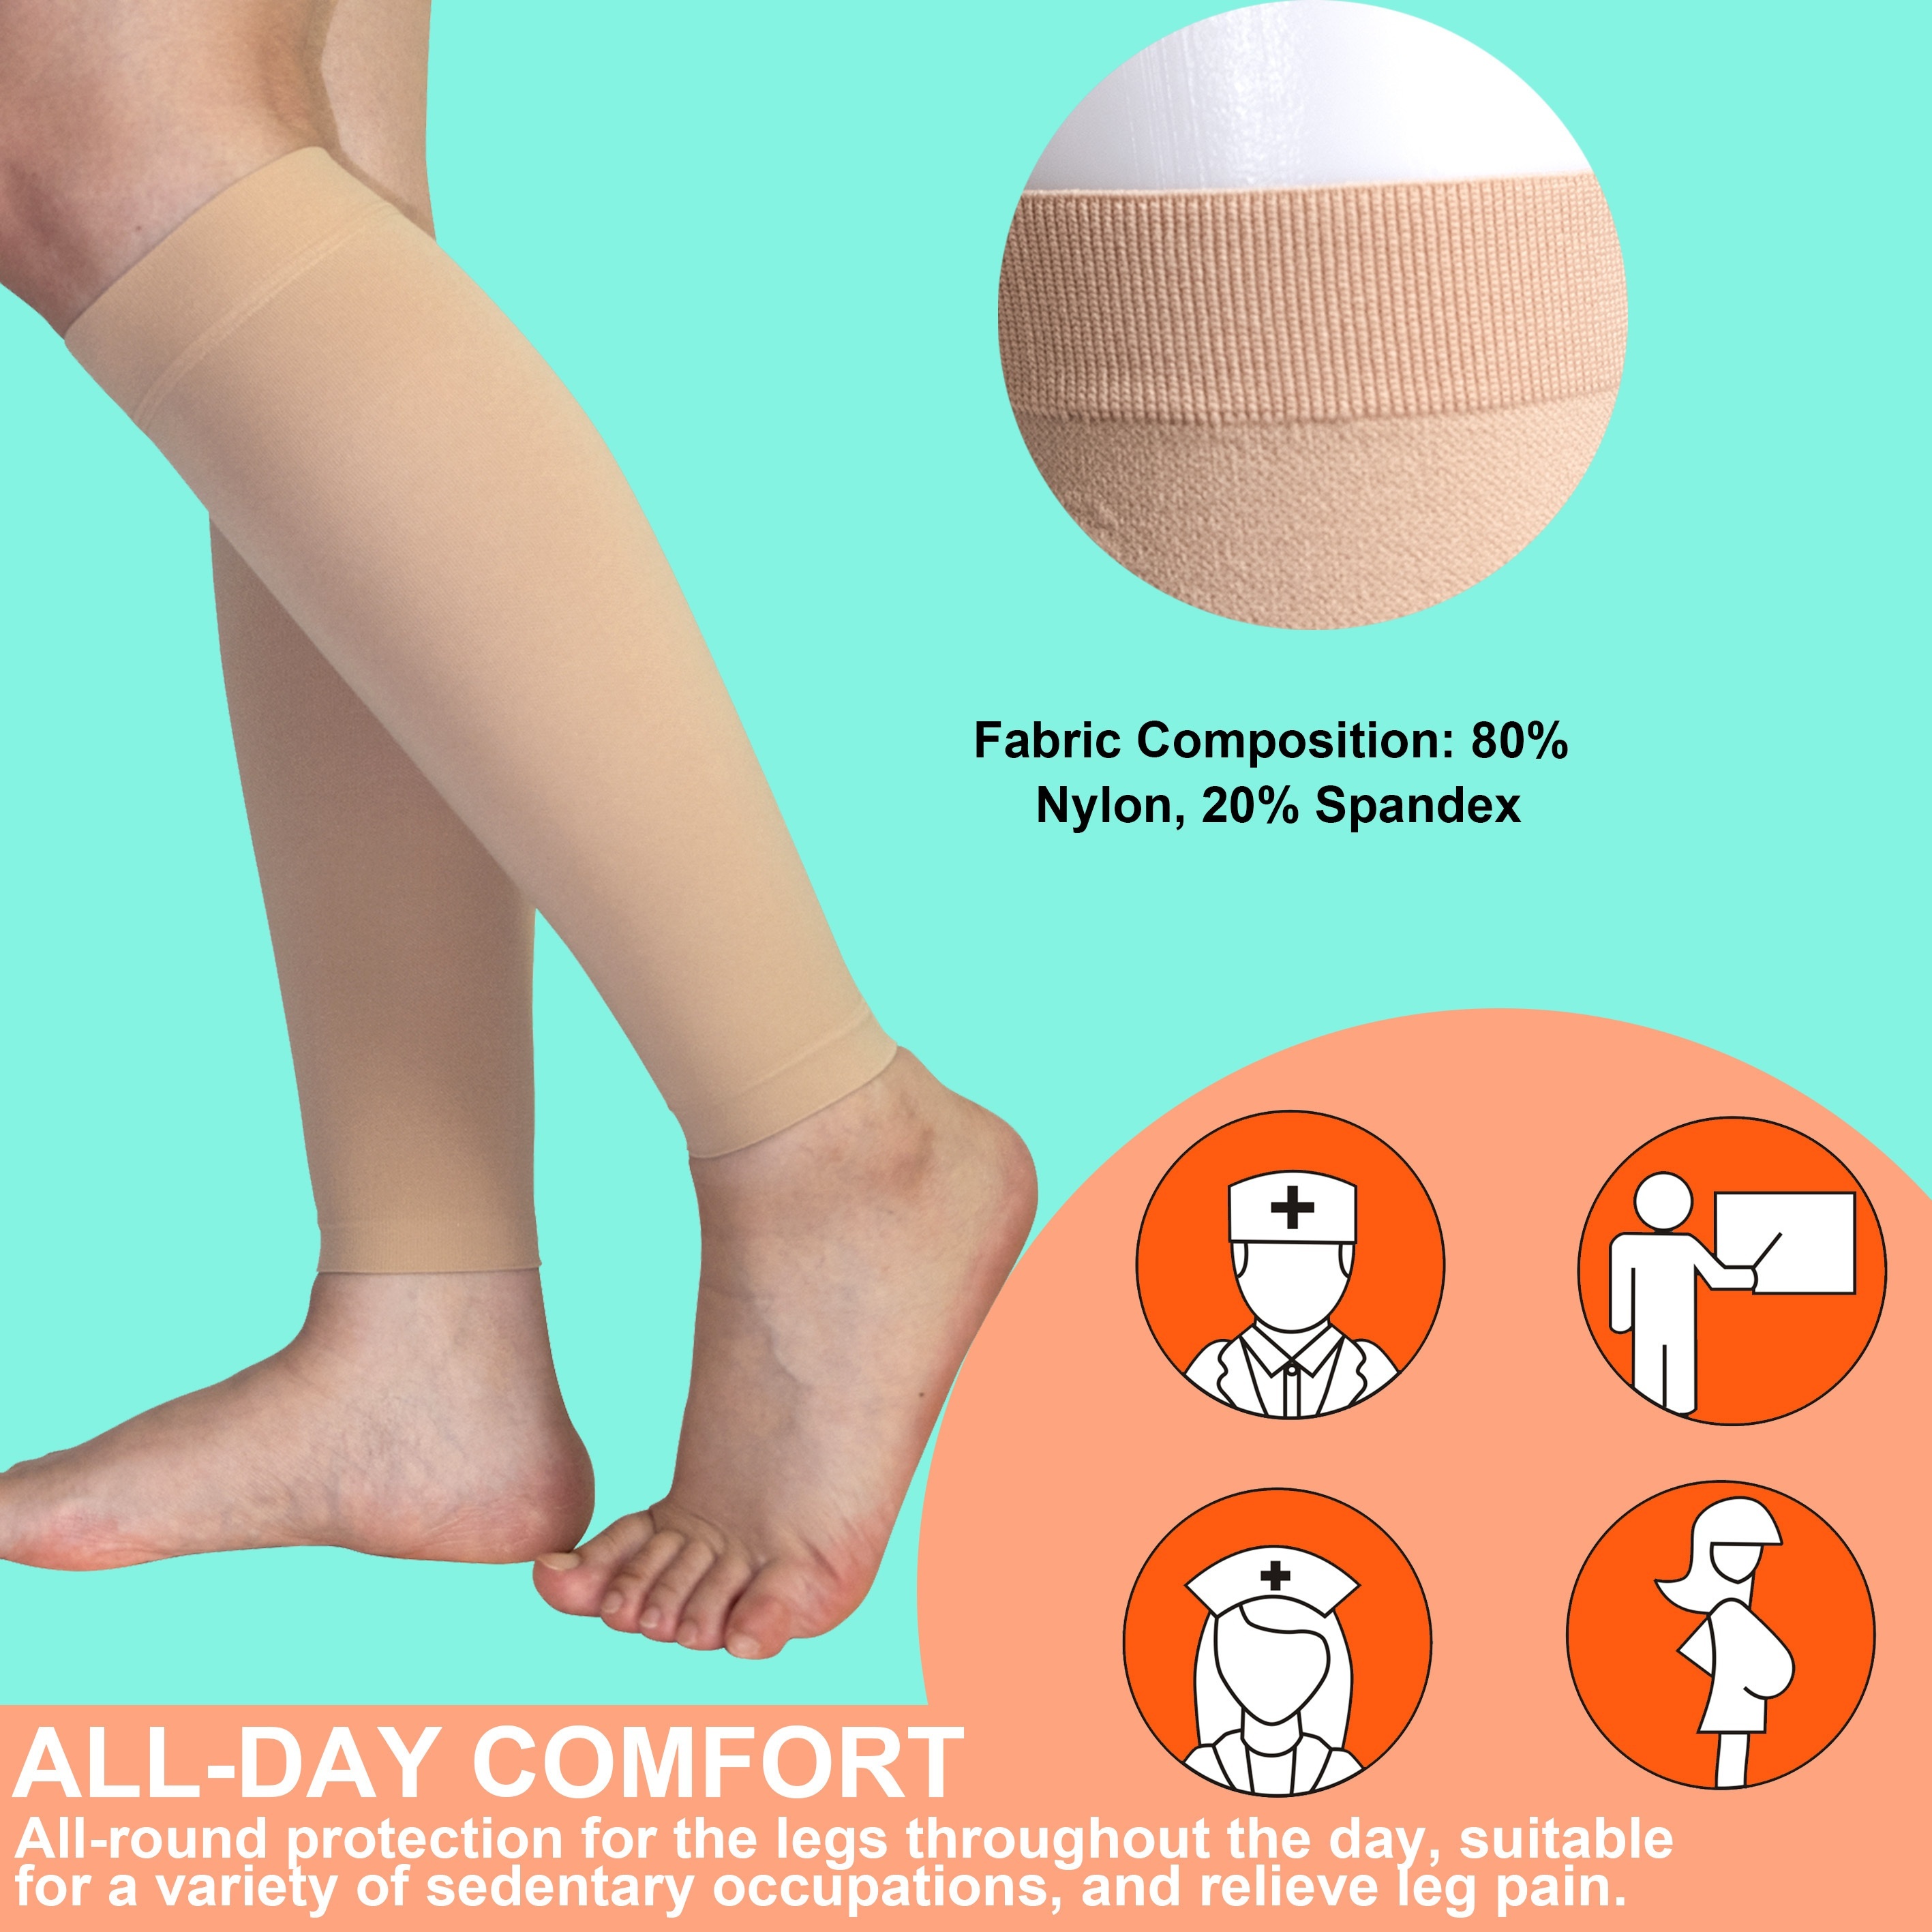  EXTREMIT-EASE Garment Liner, Unisex, Light Foot-to-Ankle  Compression, Tan, Medium, 1 Undersock/Pack : Health & Household